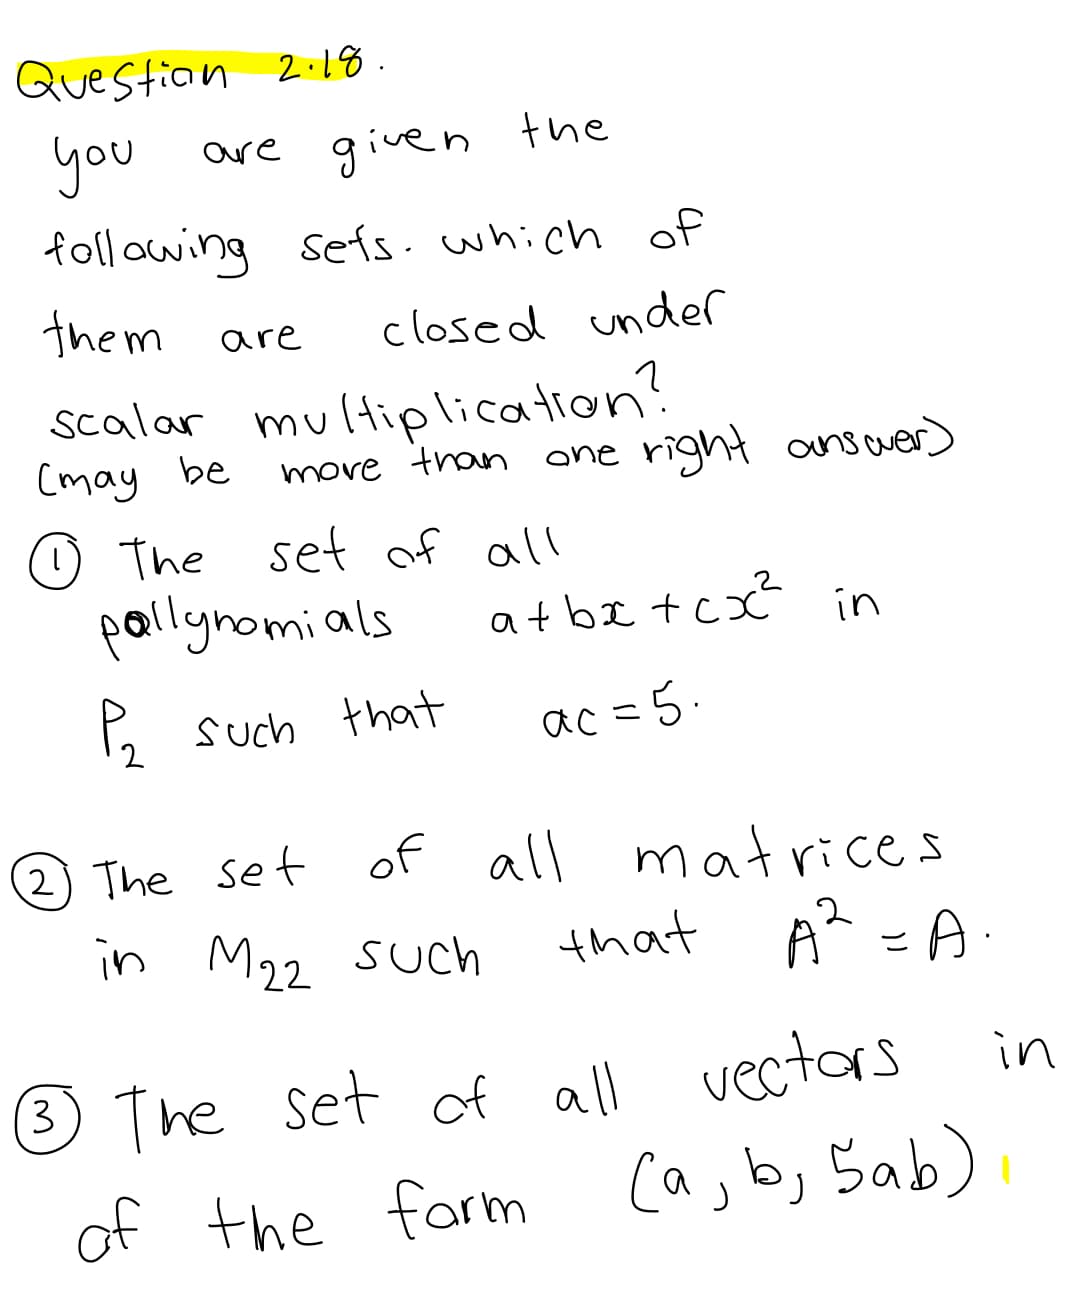 Questian 2:18.
you
are given the
foll owing sets. which of
them
closed under
are
multiplication?
move tran
Scalar
(may be
ane right answer)
O The set of all
pallynomials
at be tcx in
5 such that
ac =5.
2 The set
of all matrices
in M22
that
A - A.
Such
® The set of all vectors
i
in
of the farm (a, b, Sab)
